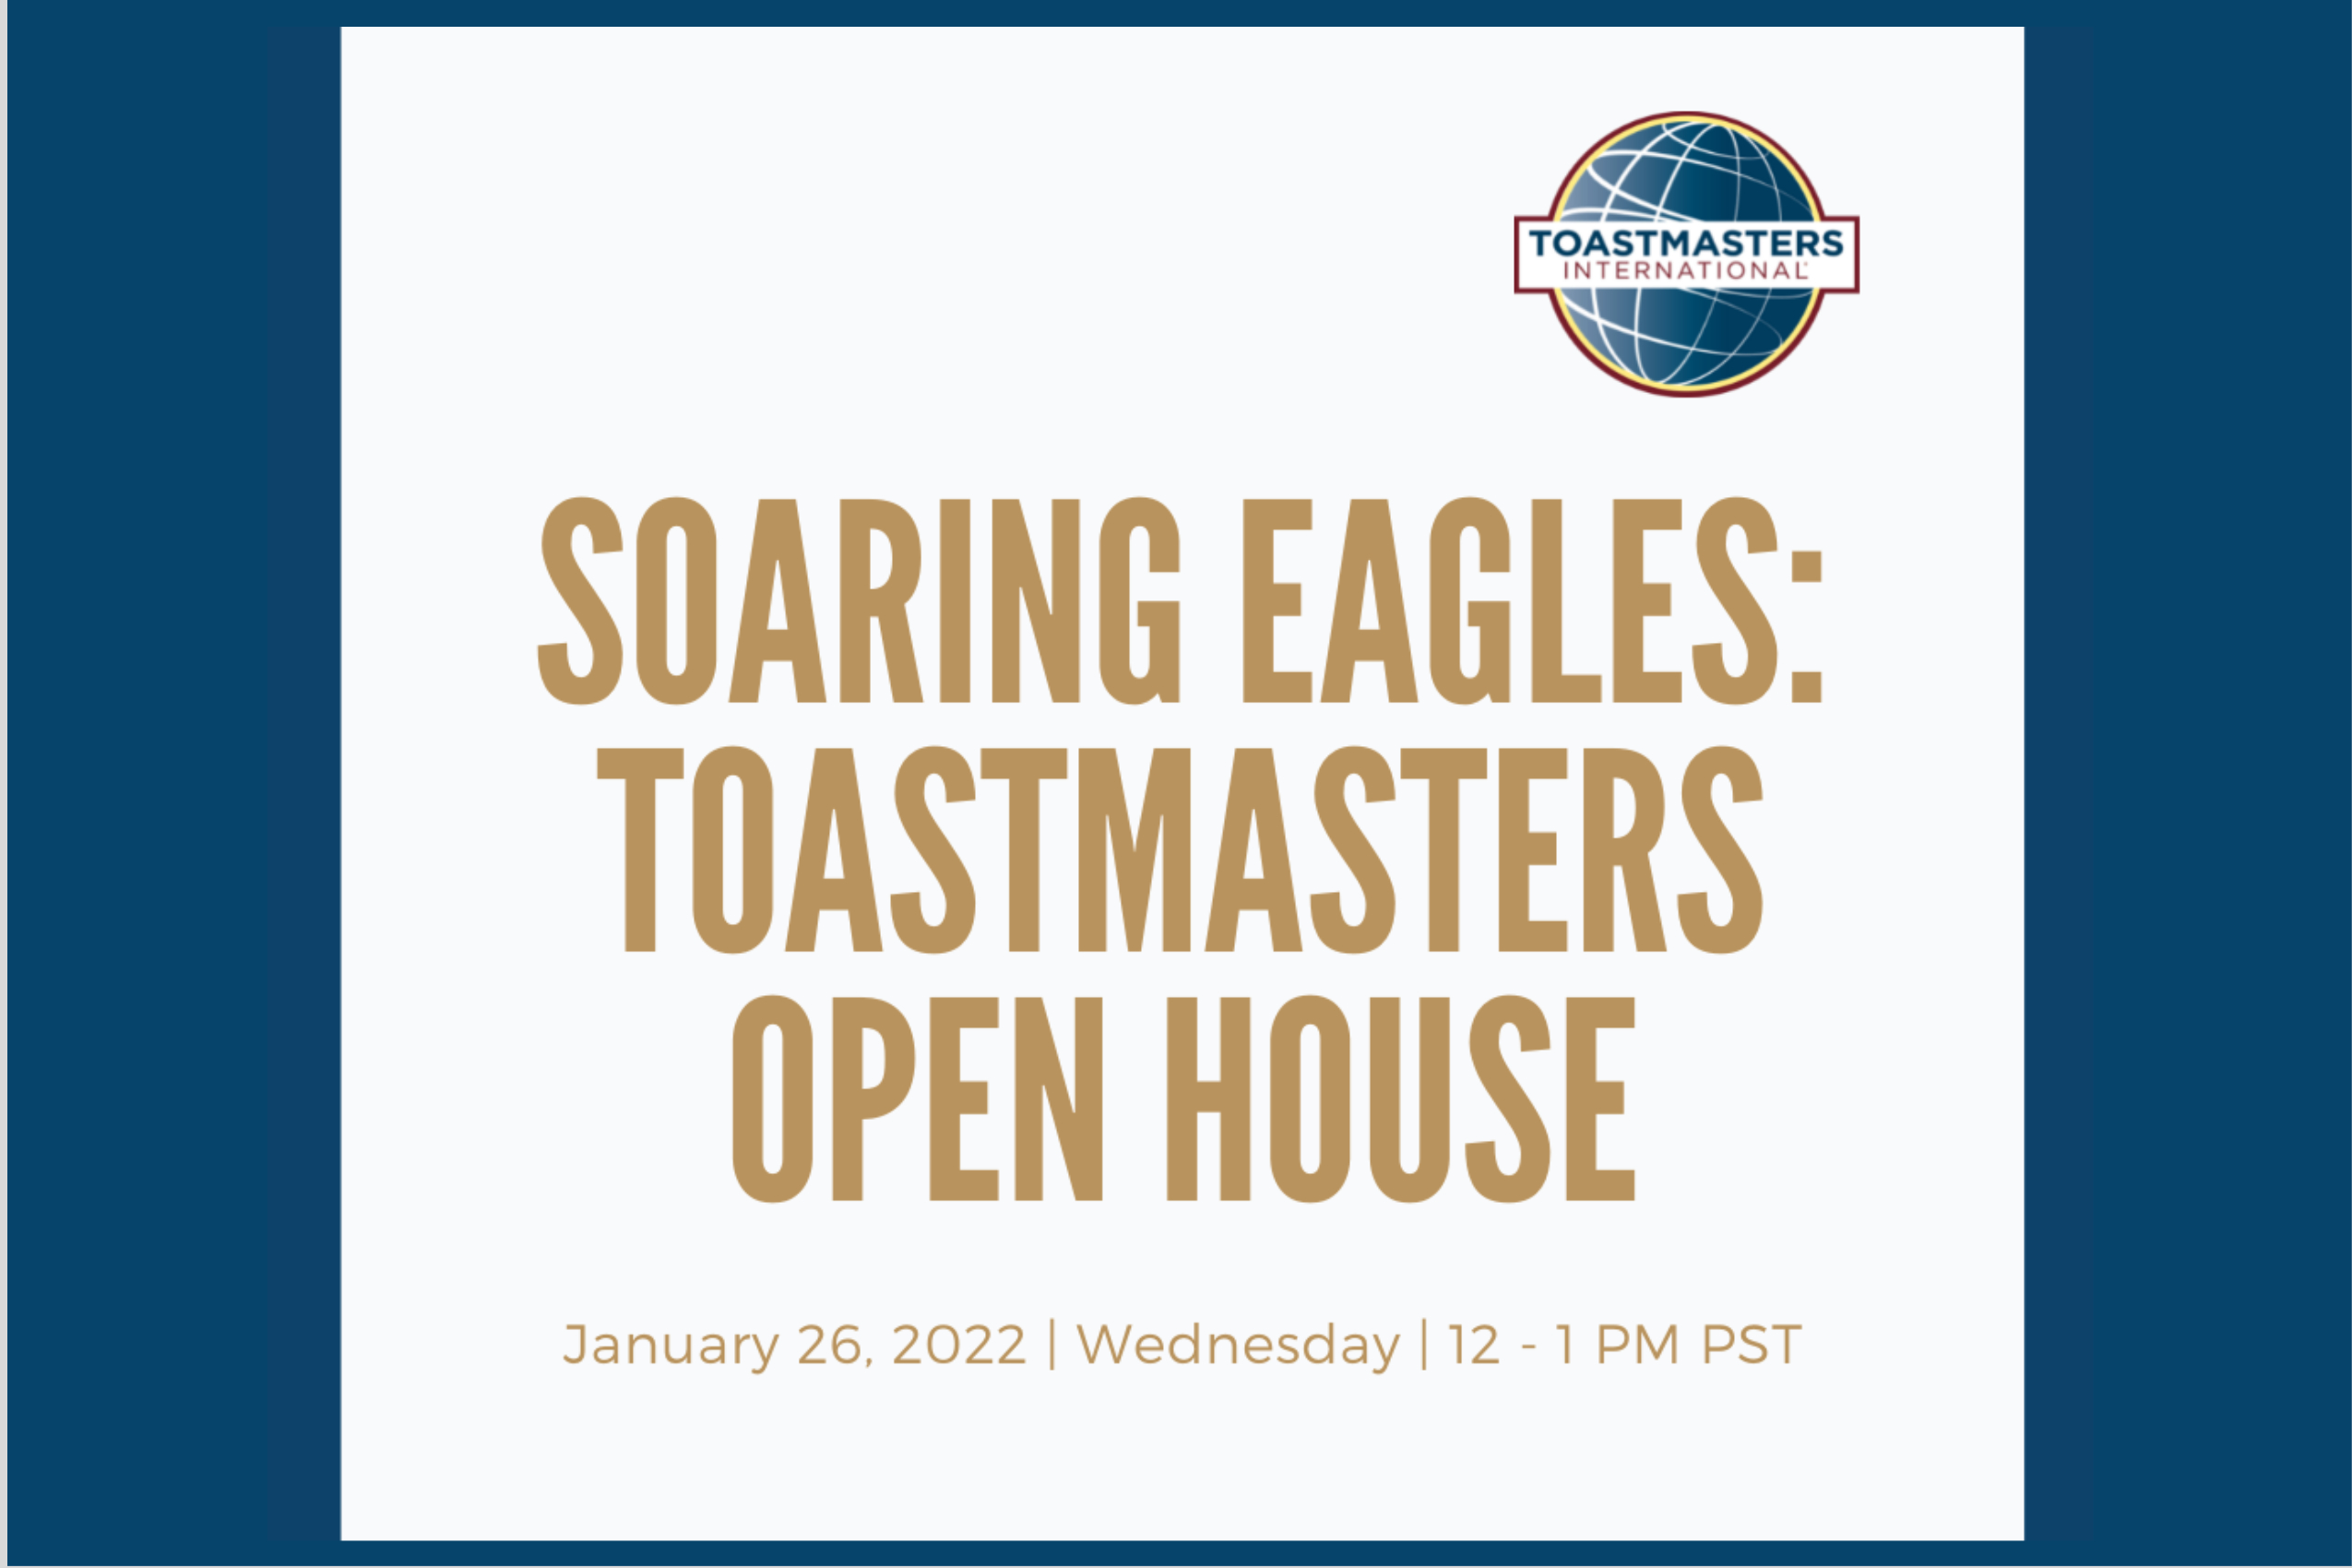 Soaring Eagles: Toastmasters Open House Event Flyer